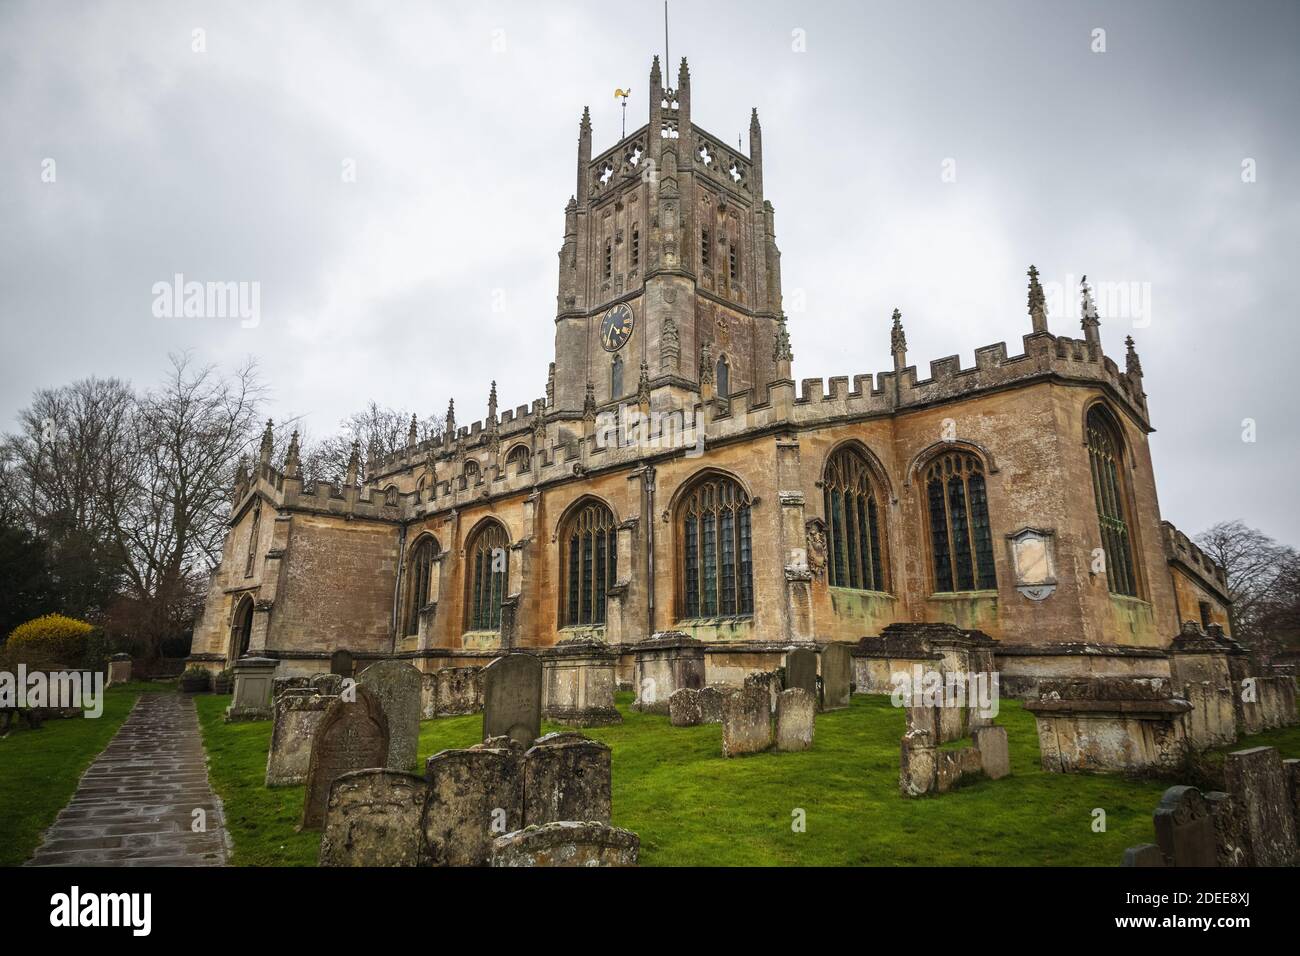 Exterior of St Mary's Church, Fairford, England on a cloudy day Stock Photo